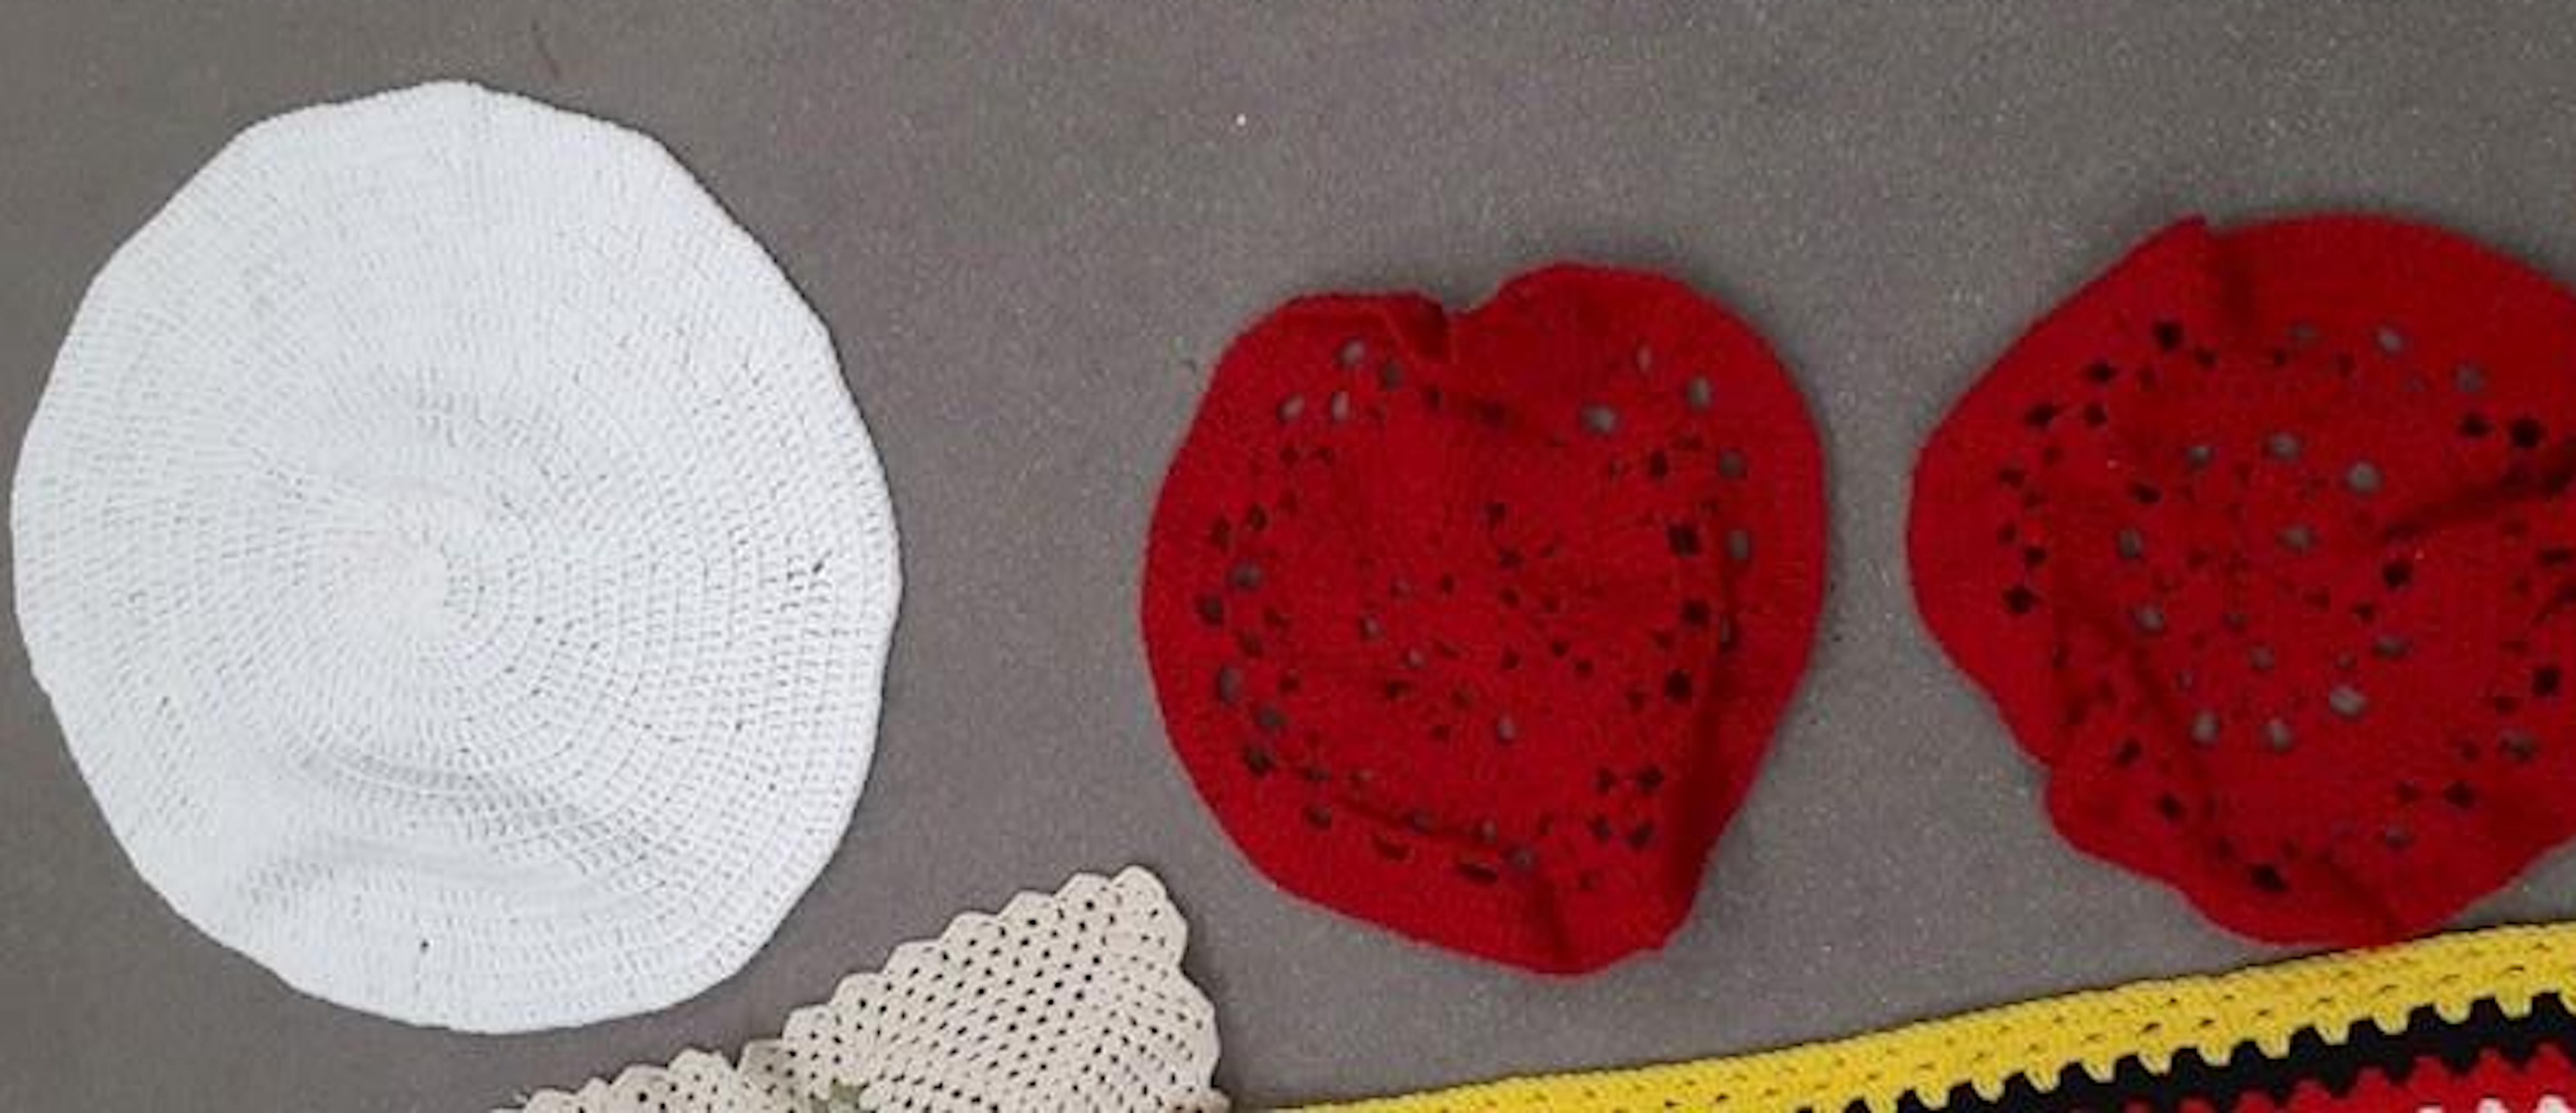 1980s Hand-Crocheted Christmas Doilies, White and Red (3 pcs)